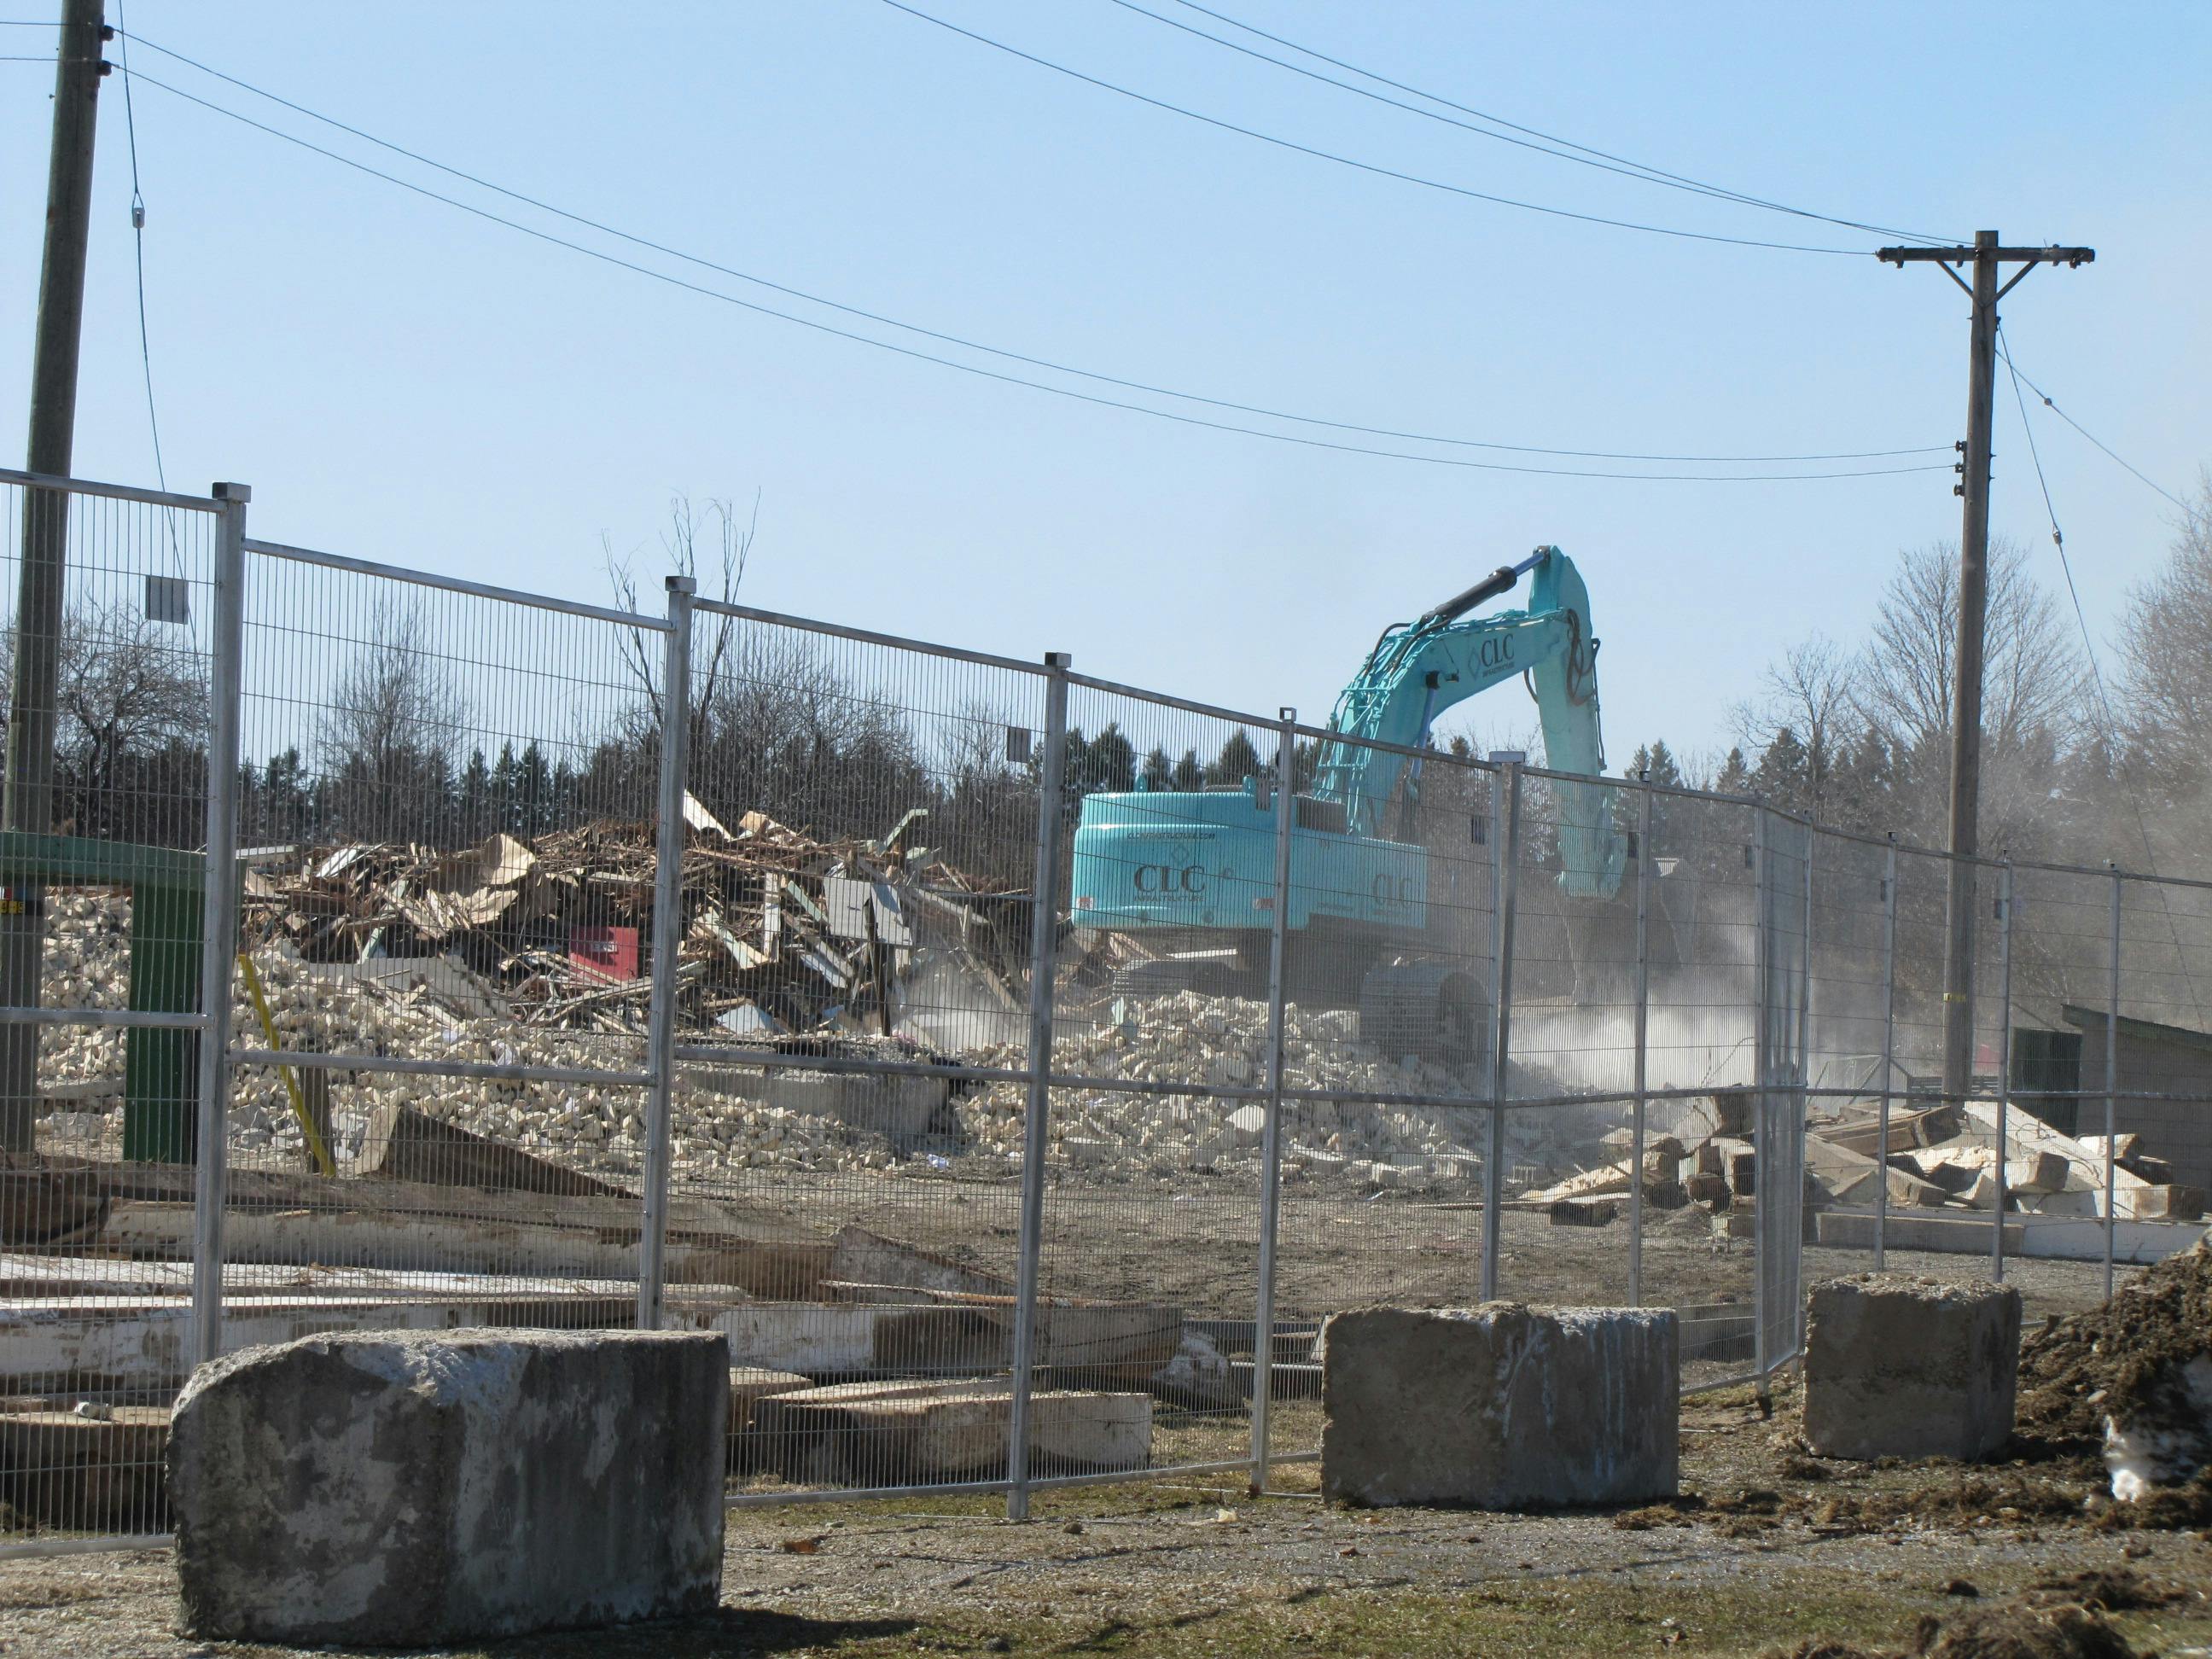 Demolition of Bogdon and Gross - March 22, 2021